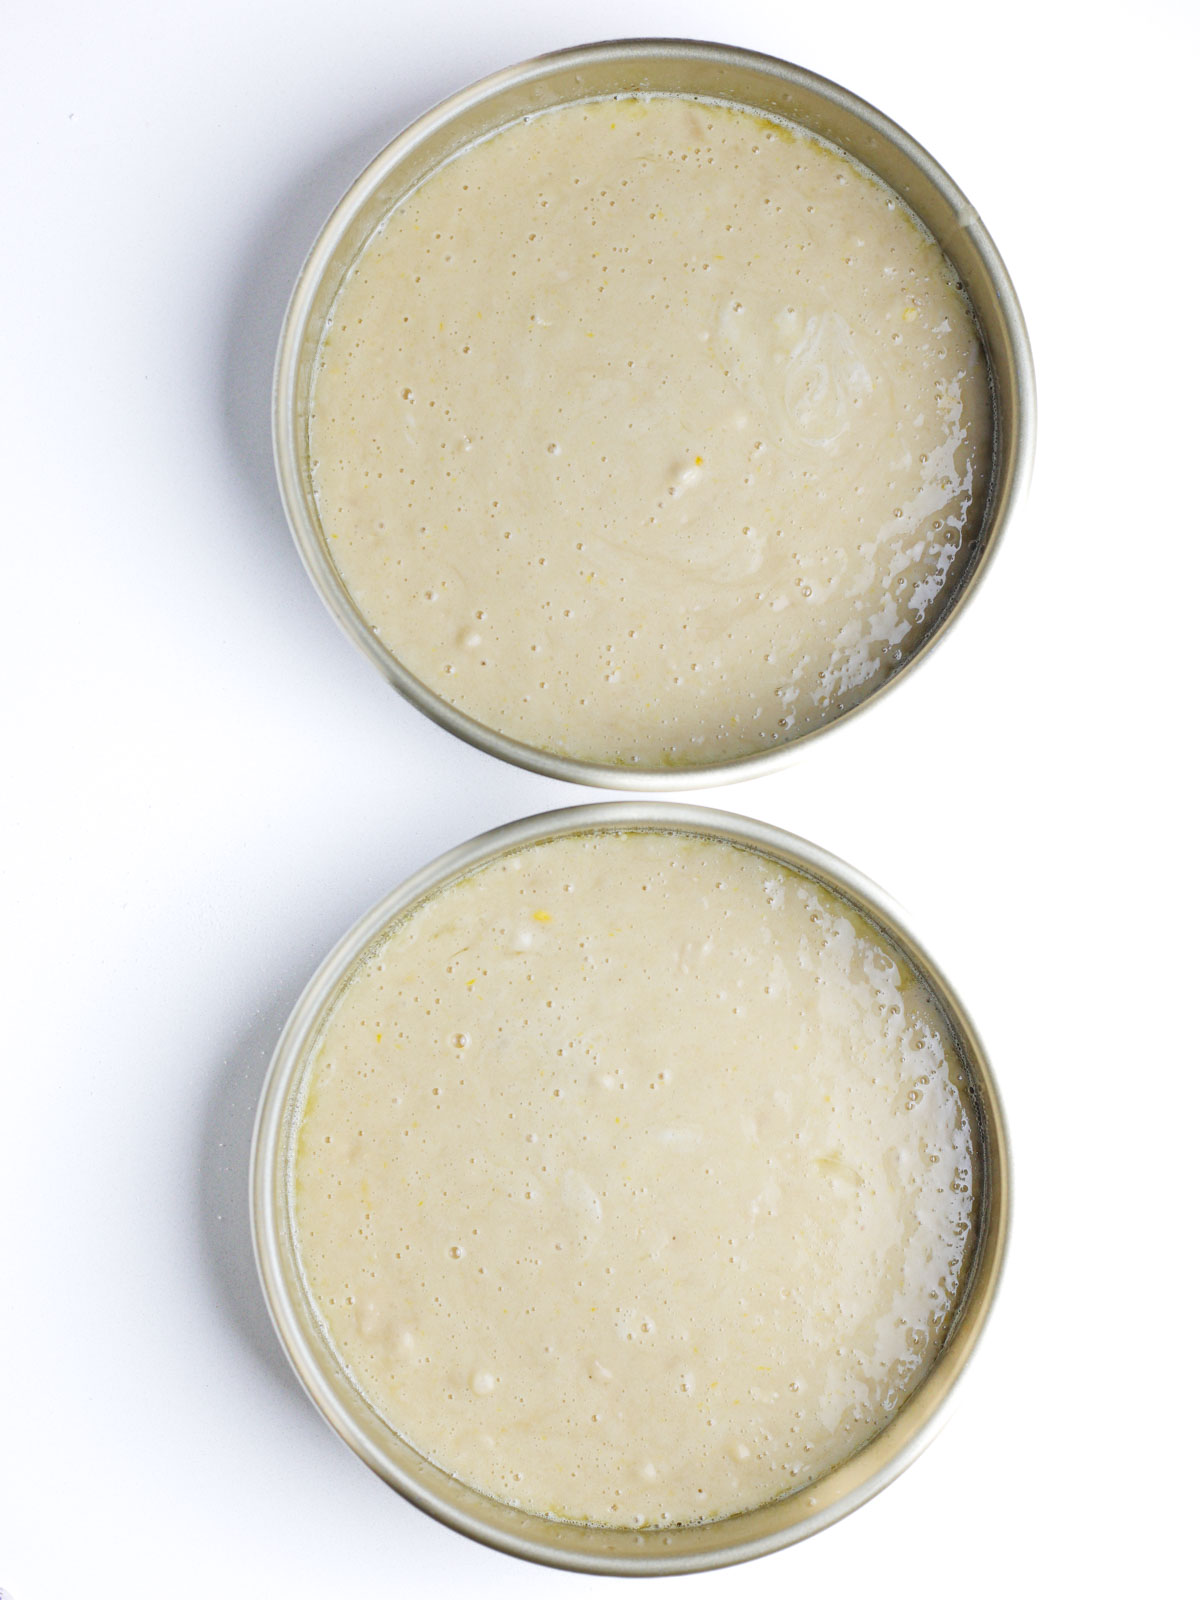 Champagne cake batter in two 9" cake pans.